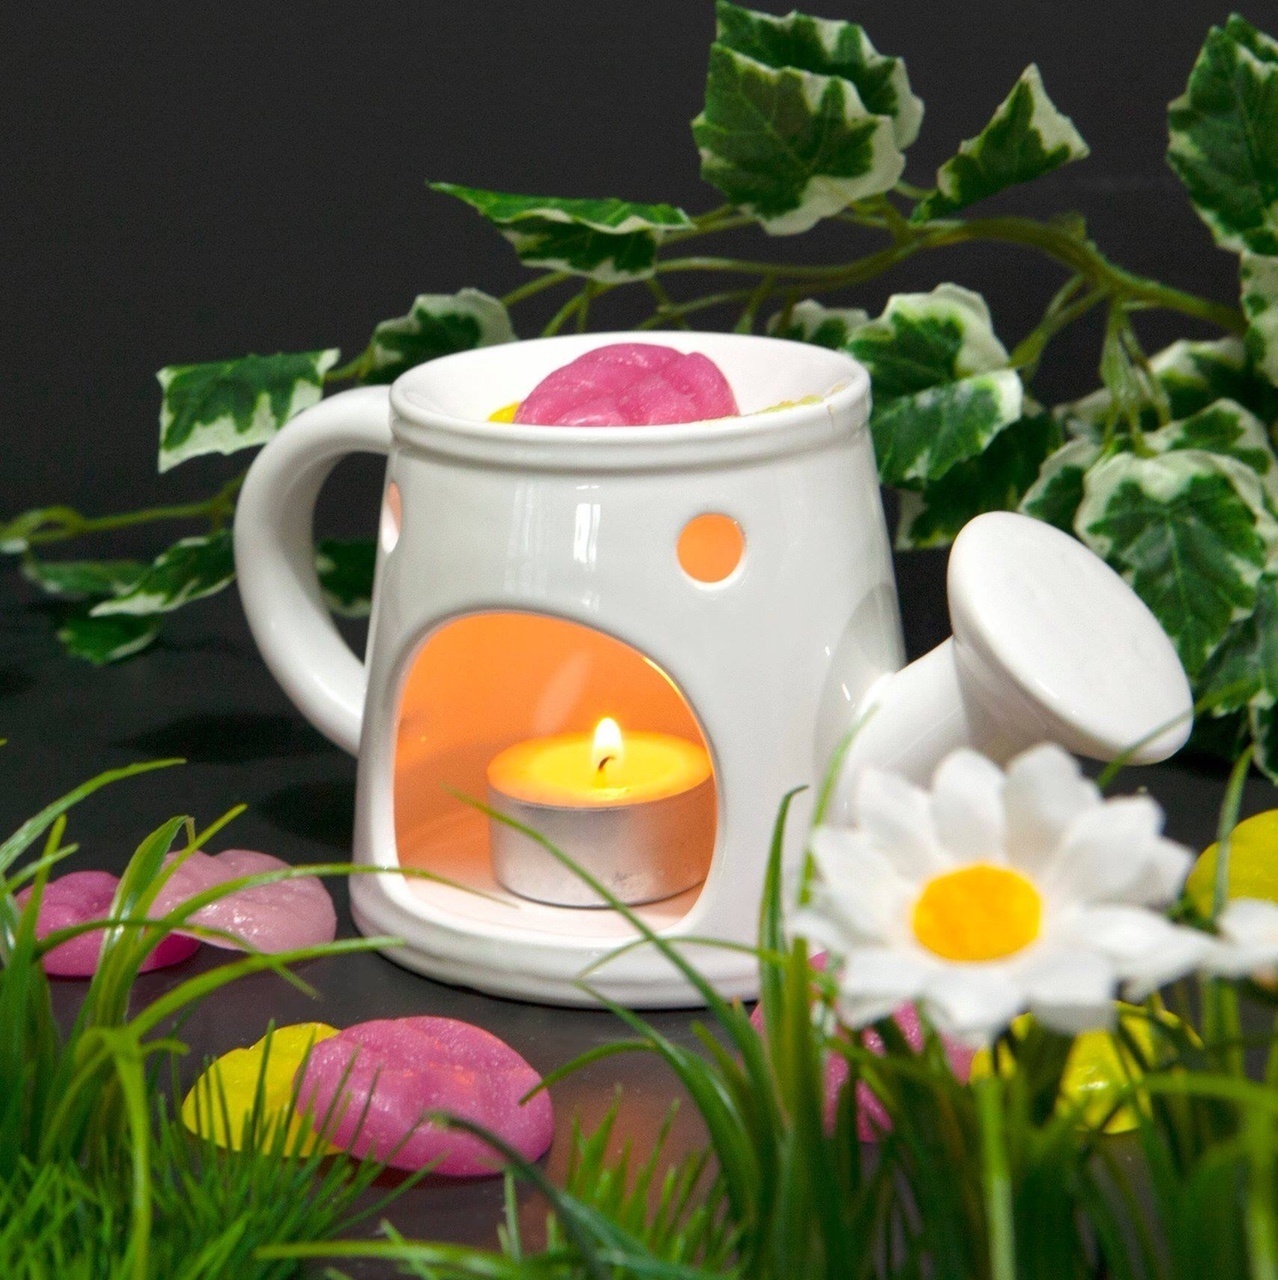 Scentchips® Watering can White scented wax burner